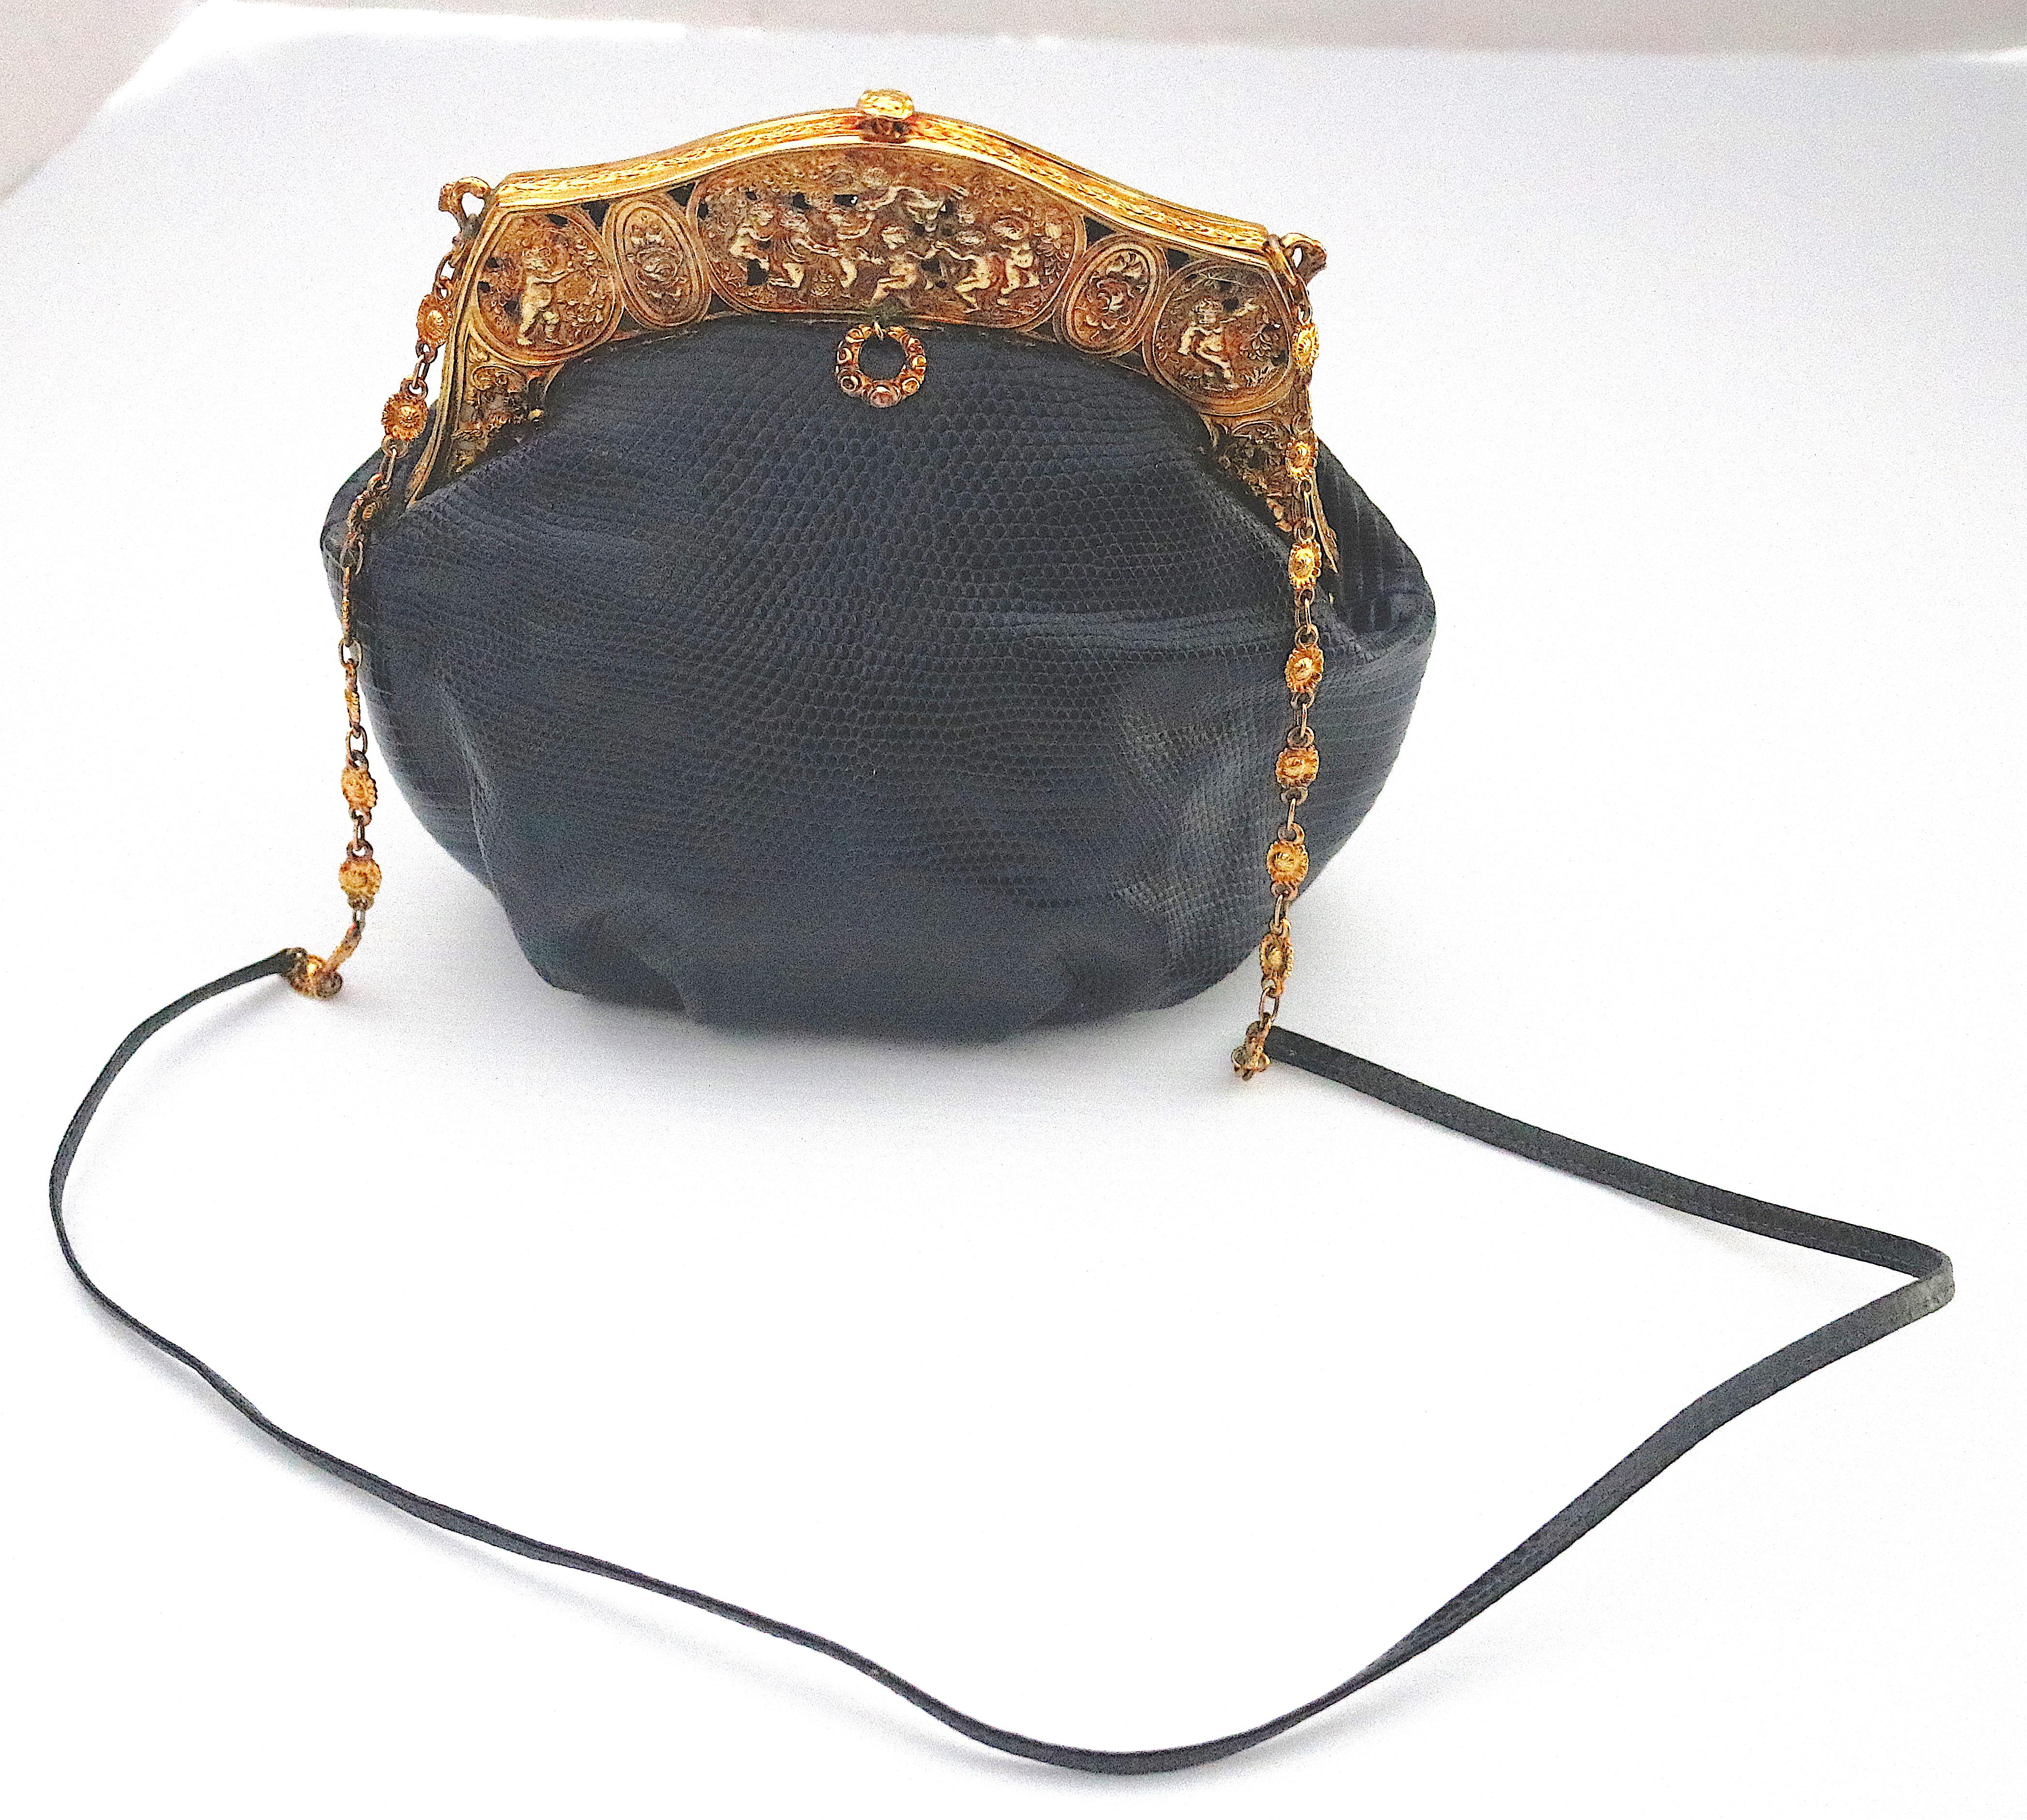 A true piece of Fashion Art and History to be admired and worn!                                                                   
Gorgeous updated for today- Heirloom Black Lizard Day or Evening Bag designed with a Baroque antique circa 1925 -22